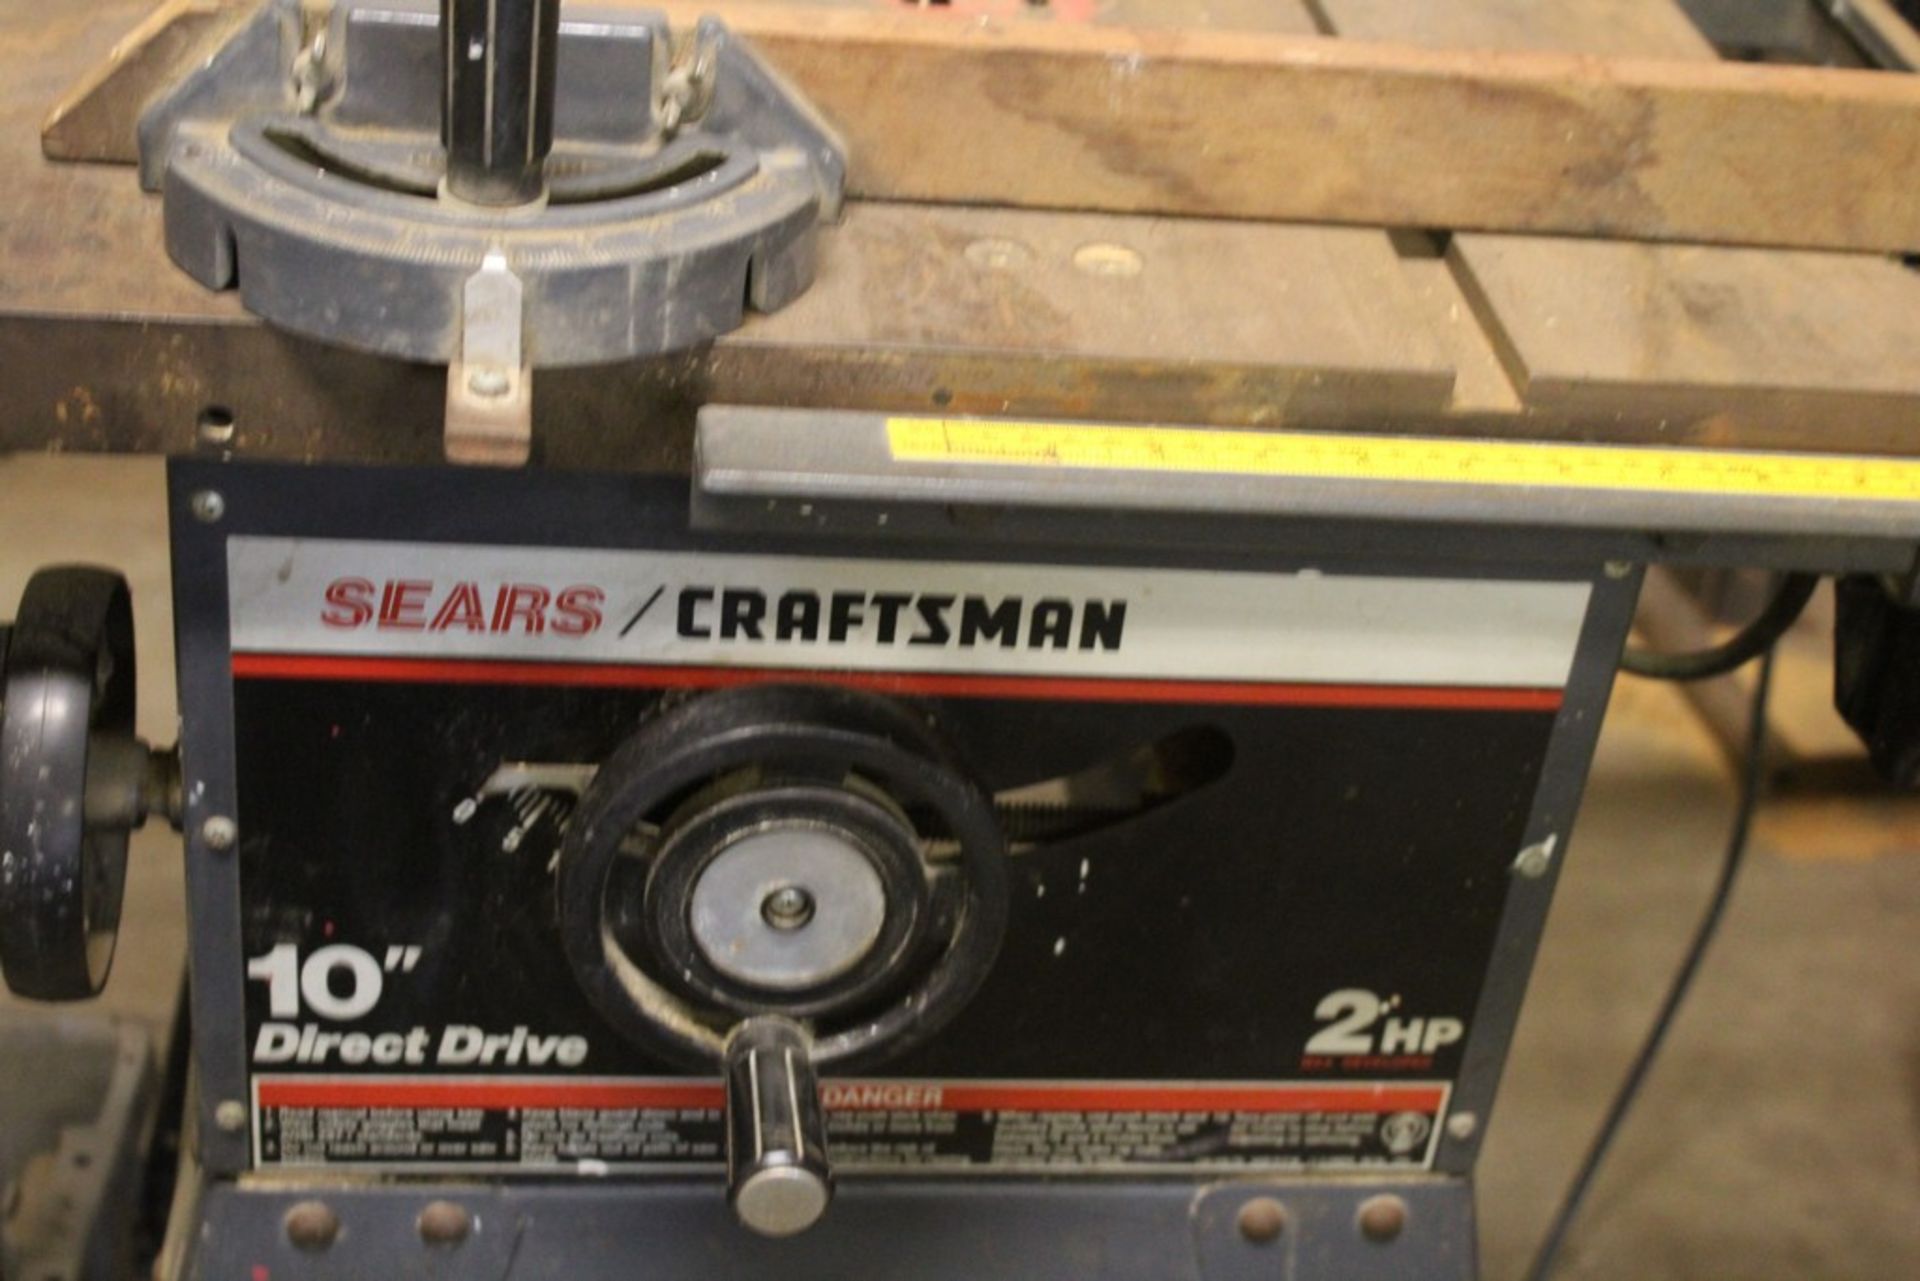 SEARS CRAFTSMAN 10" DIRECT DRIVE 2 HP TABLE SAW - Image 2 of 2